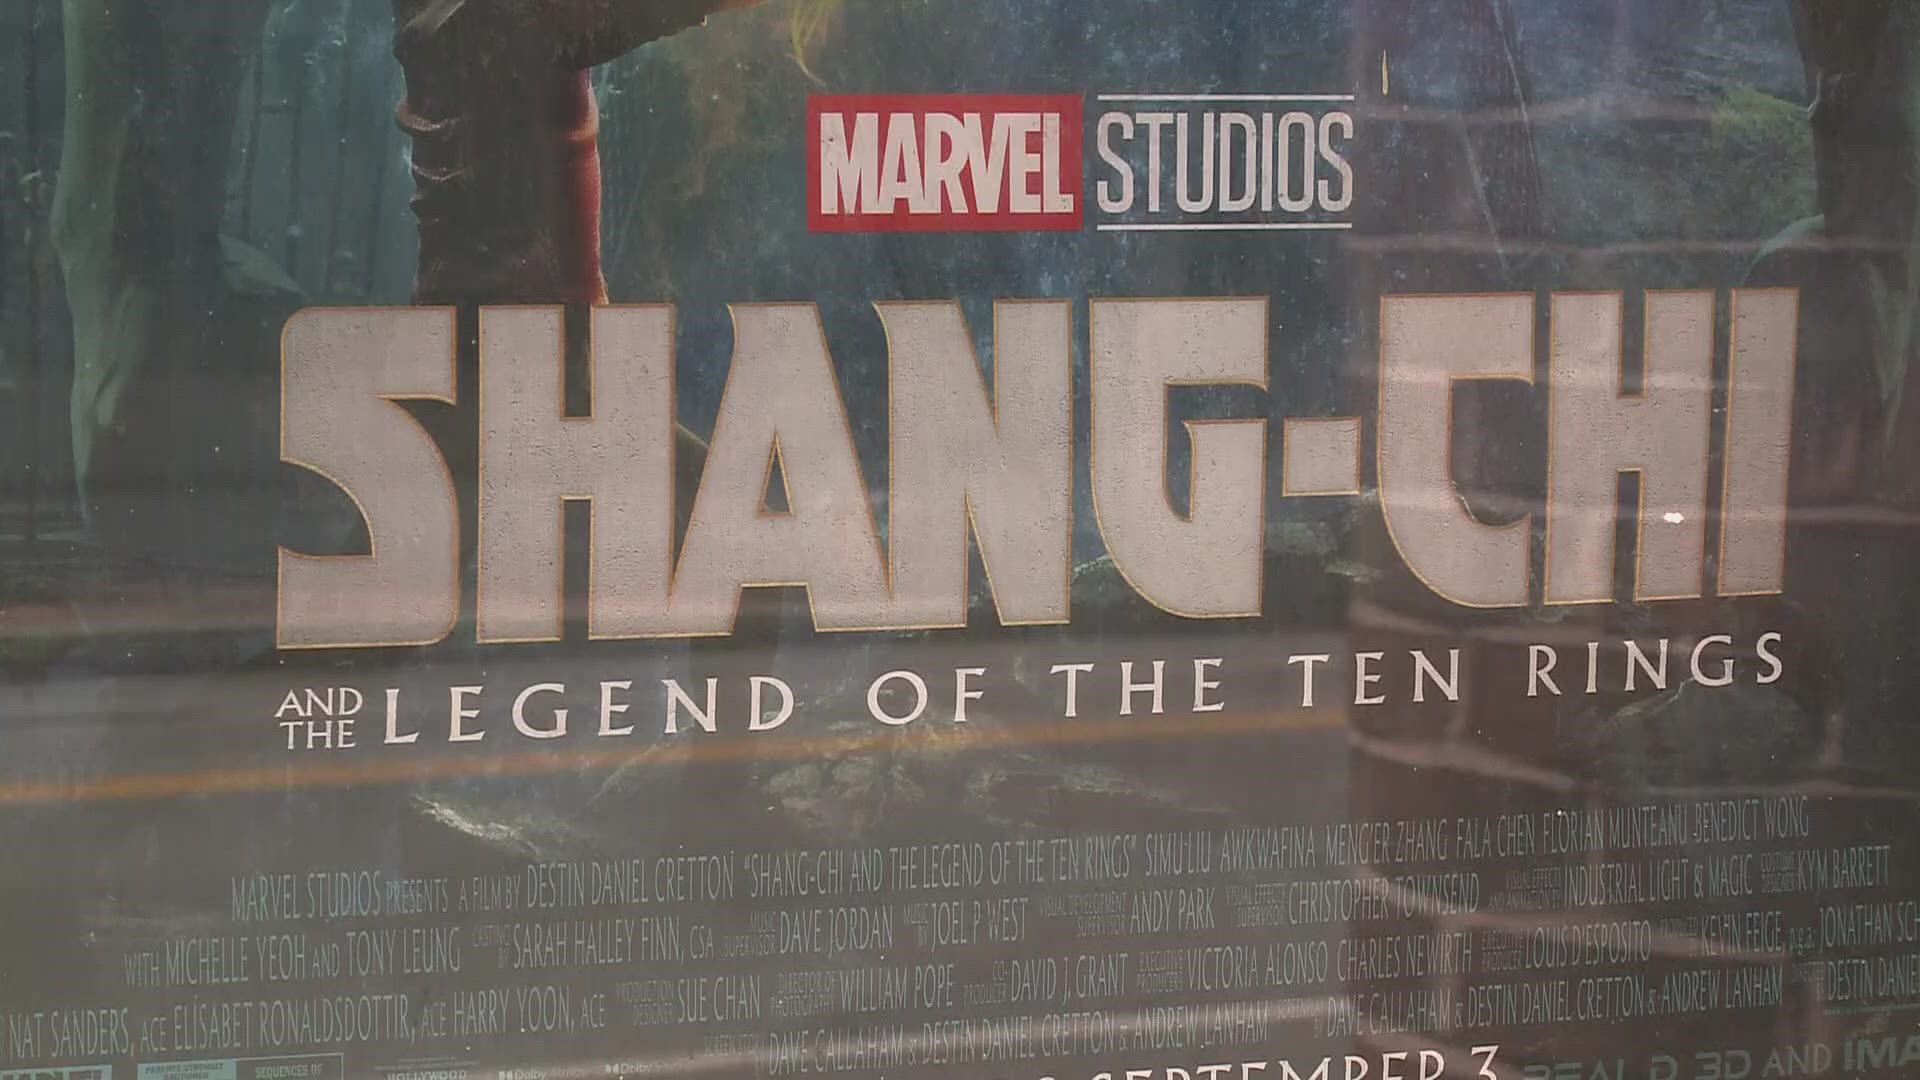 Disney's "Shang-Chi and the Legend of the Ten Rings" will be the first Marvel film to premiere exclusively in theaters since March of 2020.